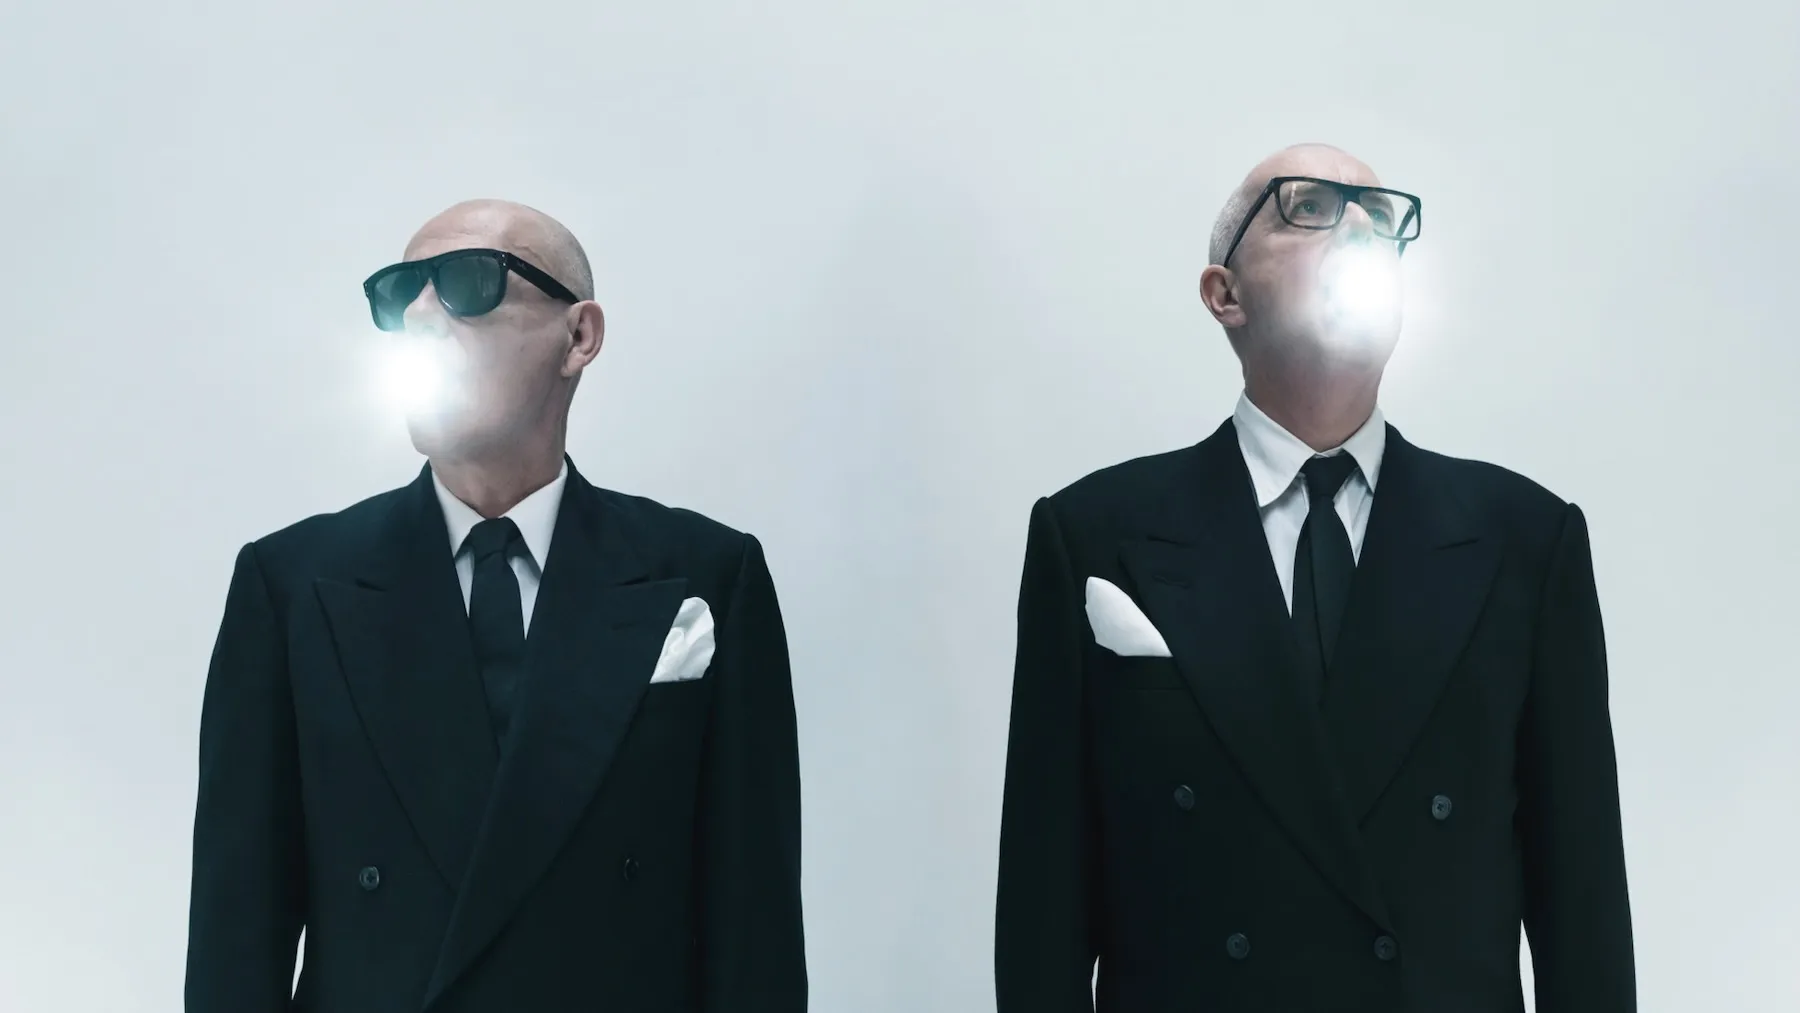 The Pet Shop Boys – Nonetheless Review